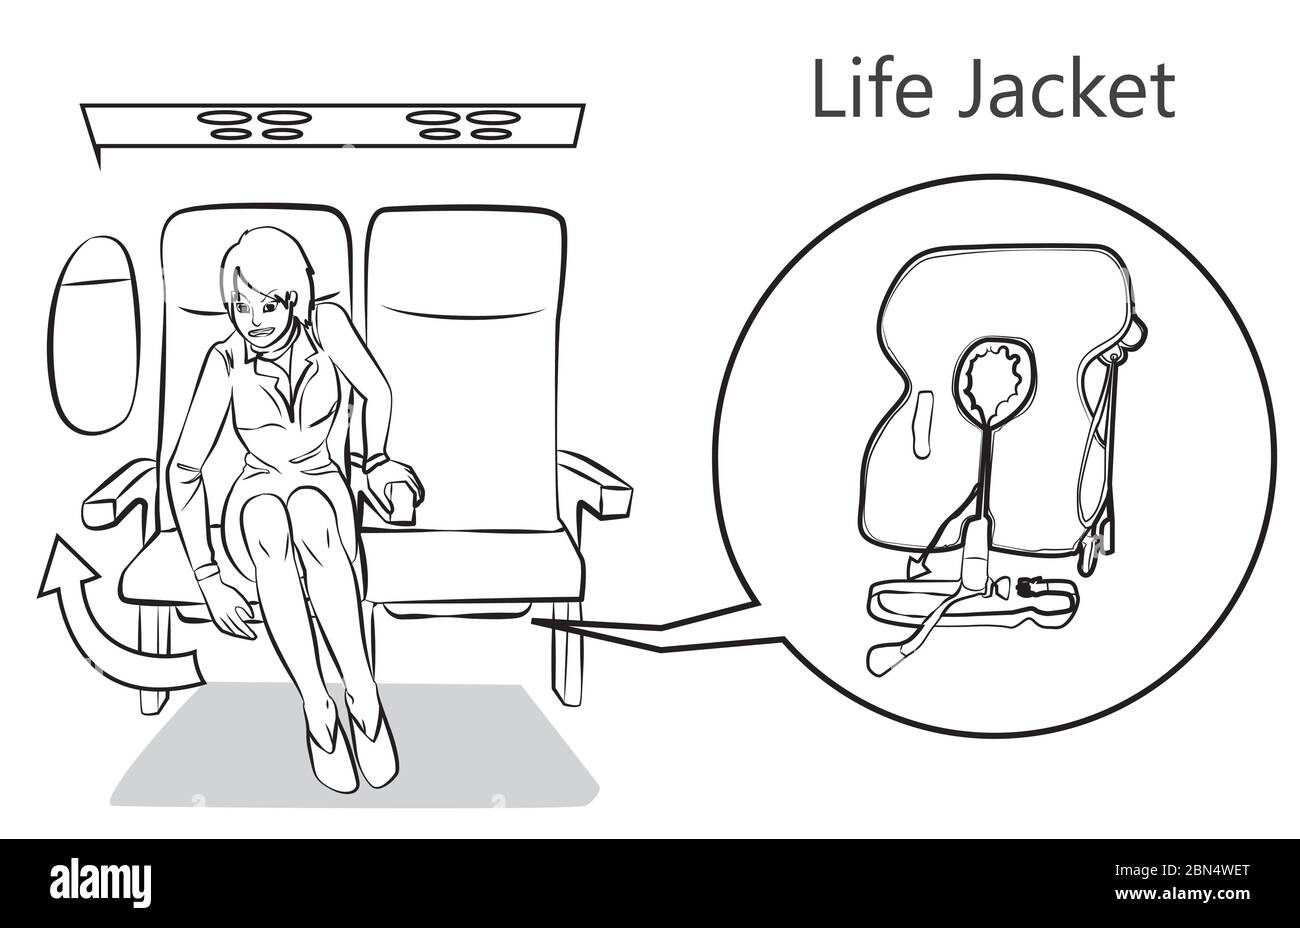 Airlines showing how to pick up life jackets under the passenger seat and shoe the detail of life jacket cartoon vector outline stroke Stock Vector